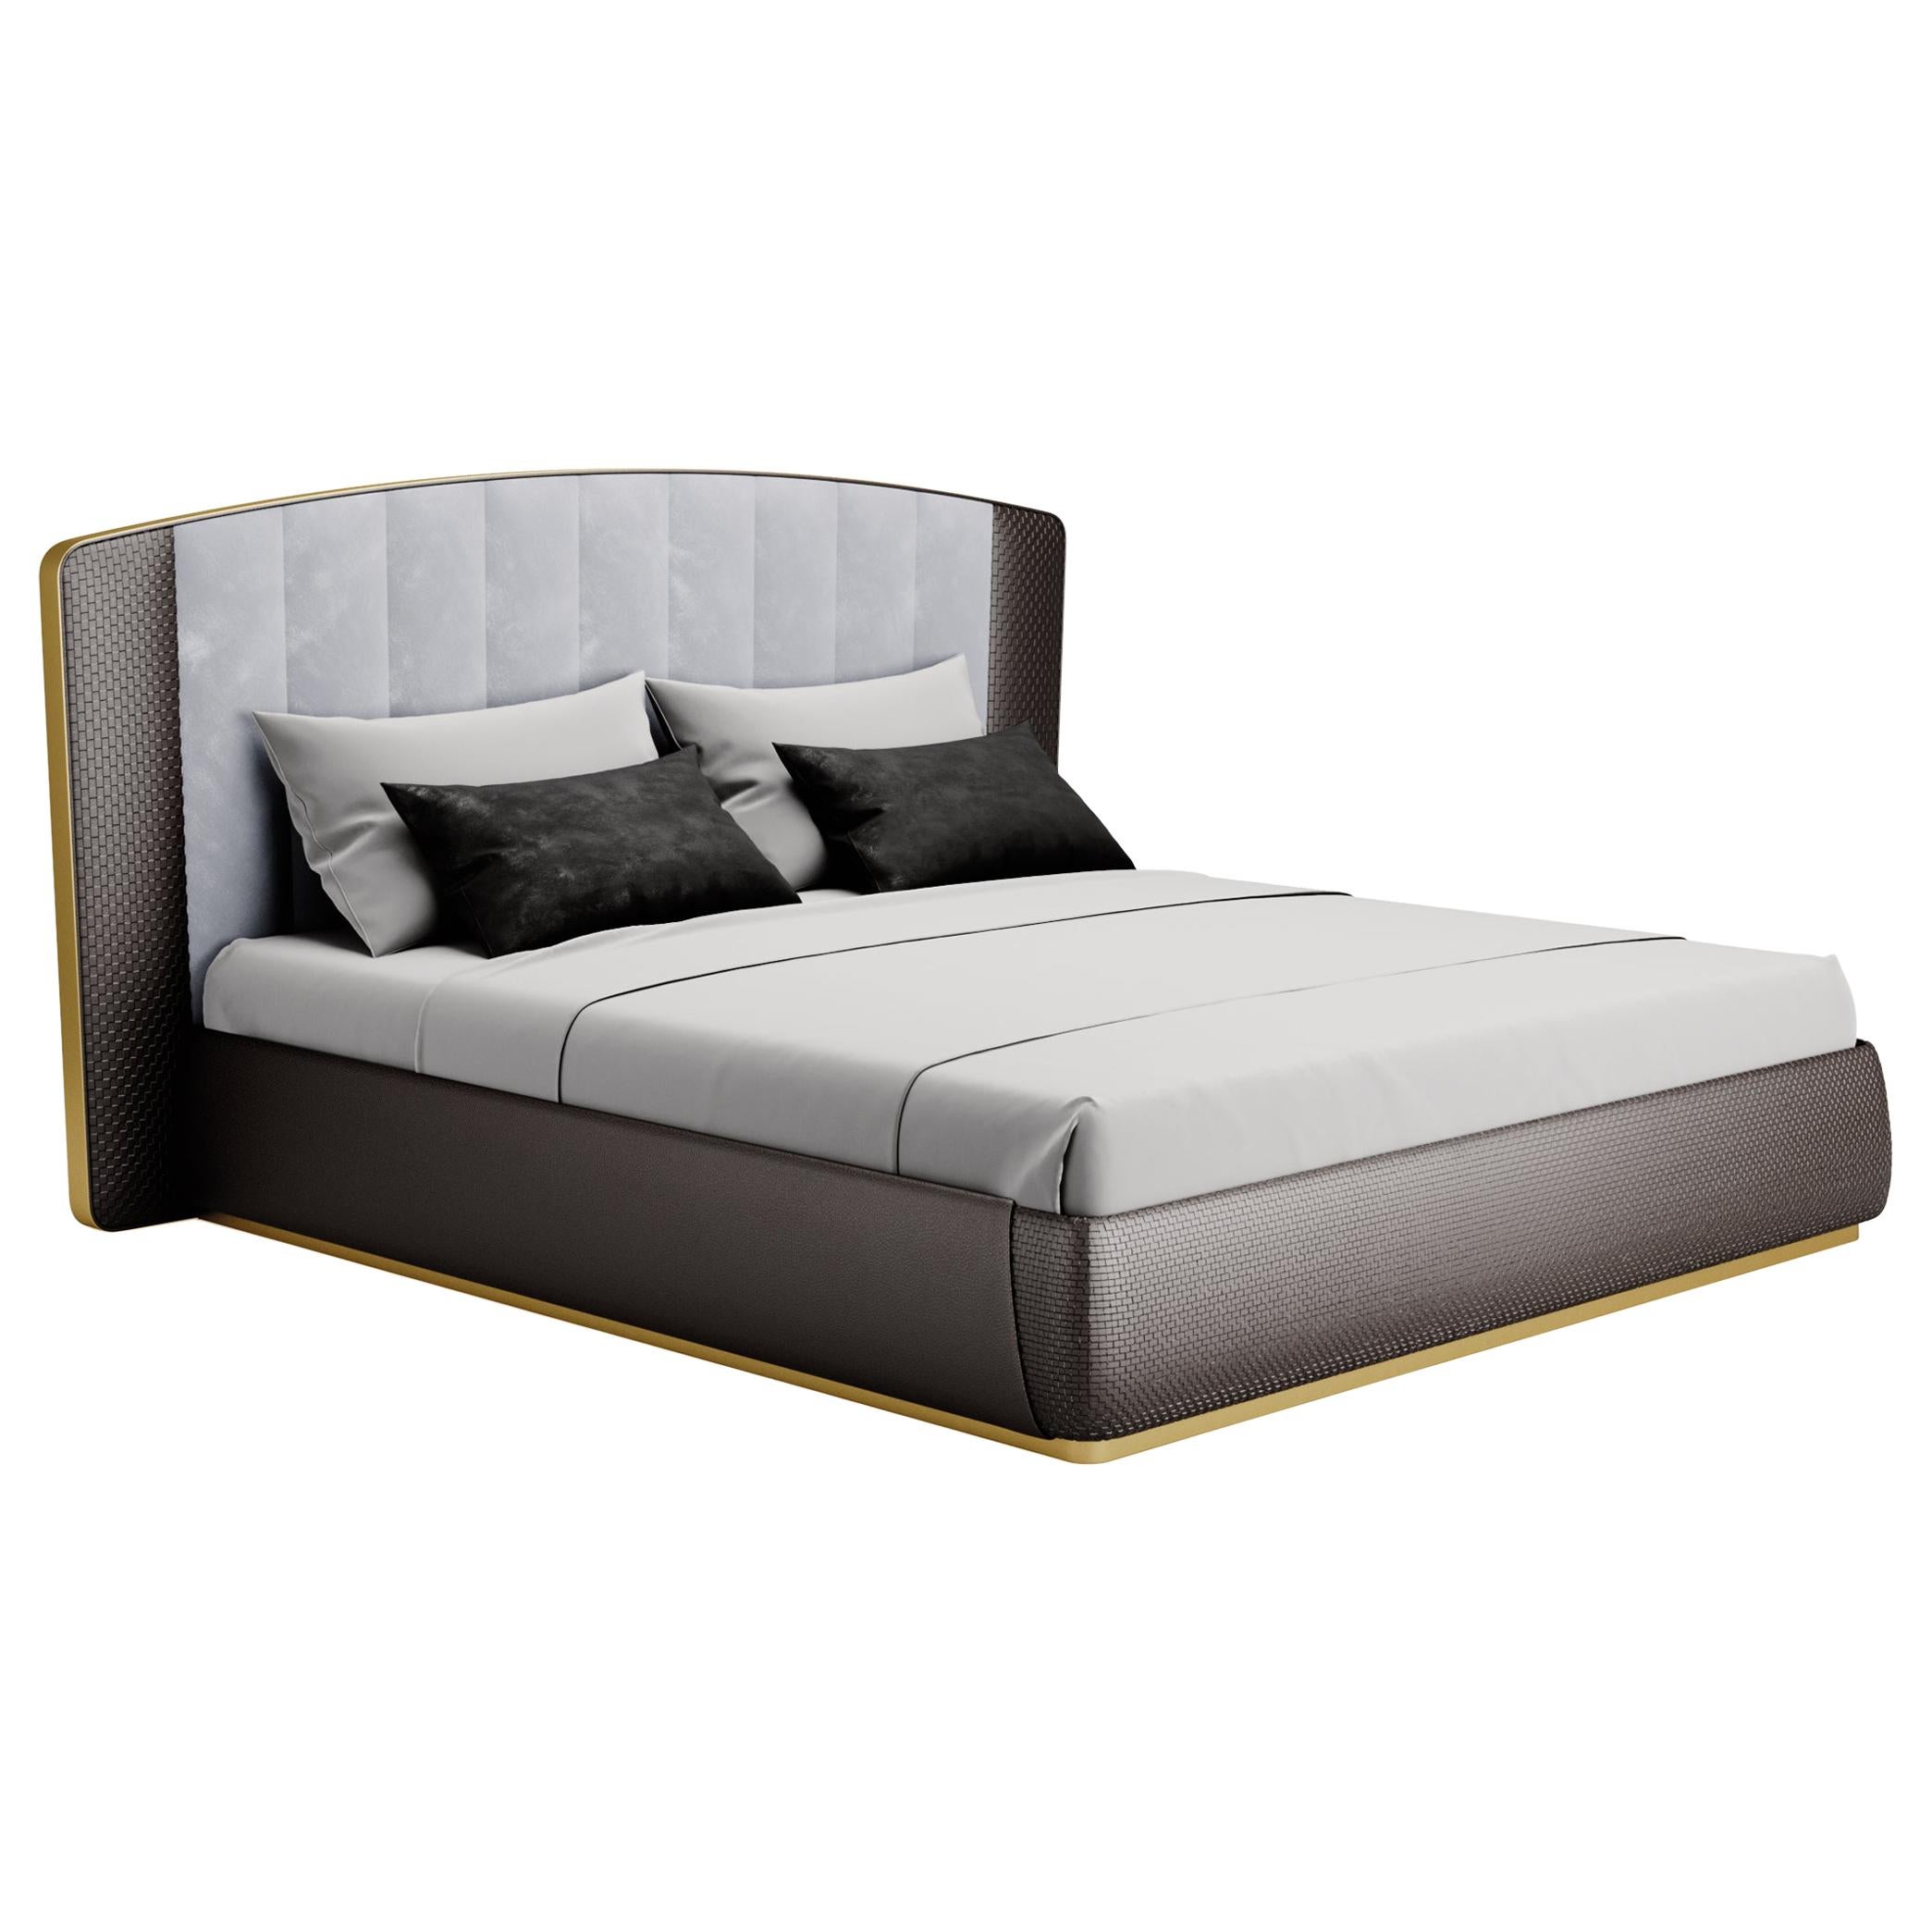 Contemporary King Size Bed, Velvet and Crossed Leather Details and Metal Frame For Sale